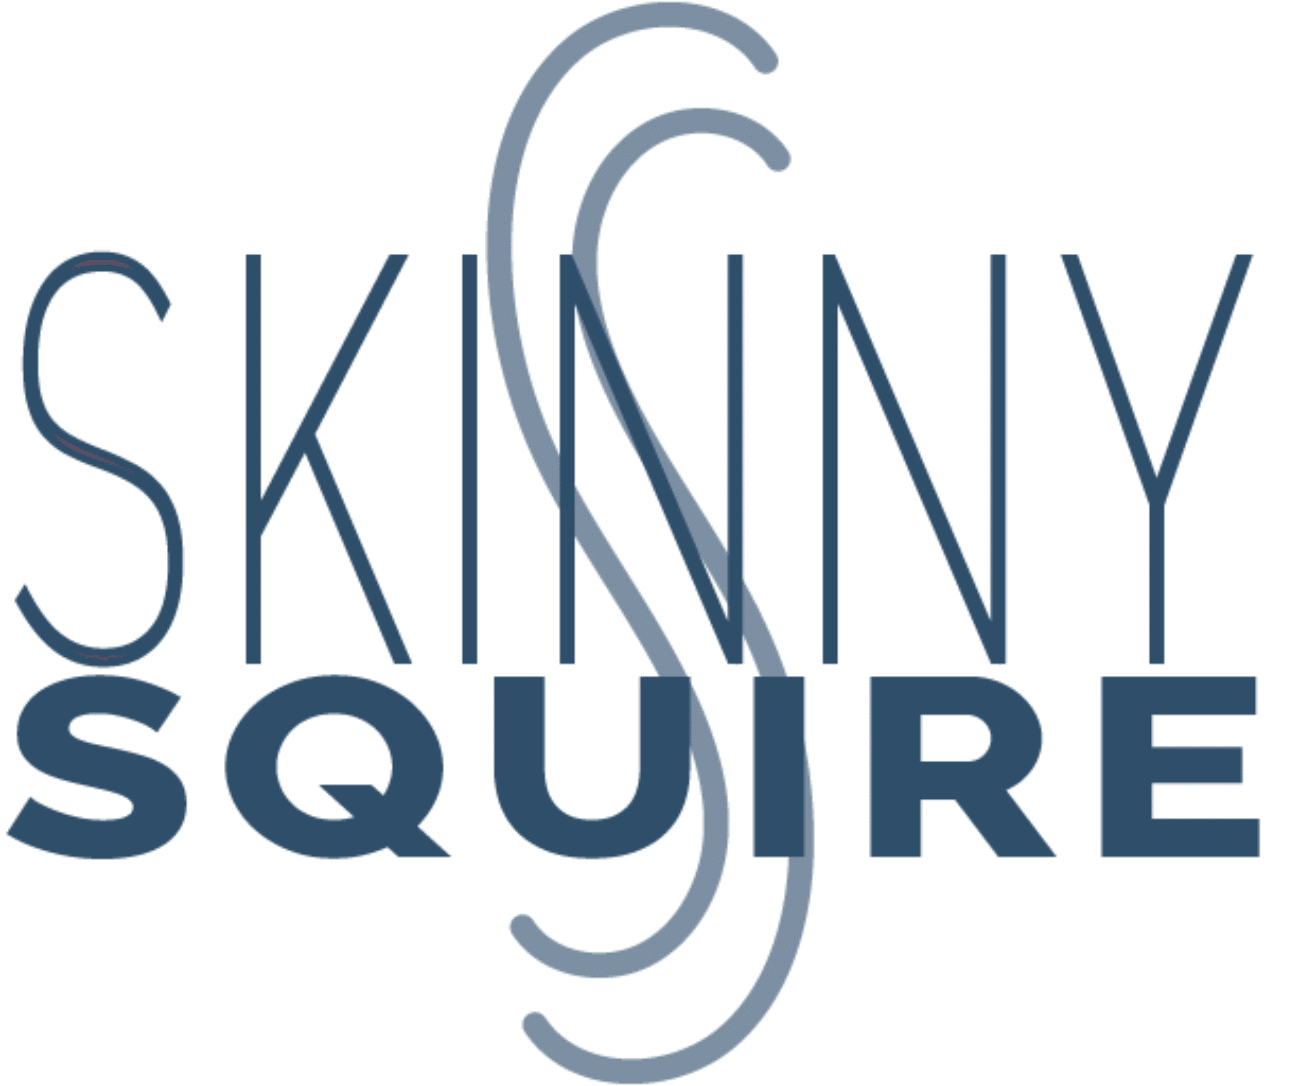 Travel and Fitness with the Skinny Squire on TravelSquire